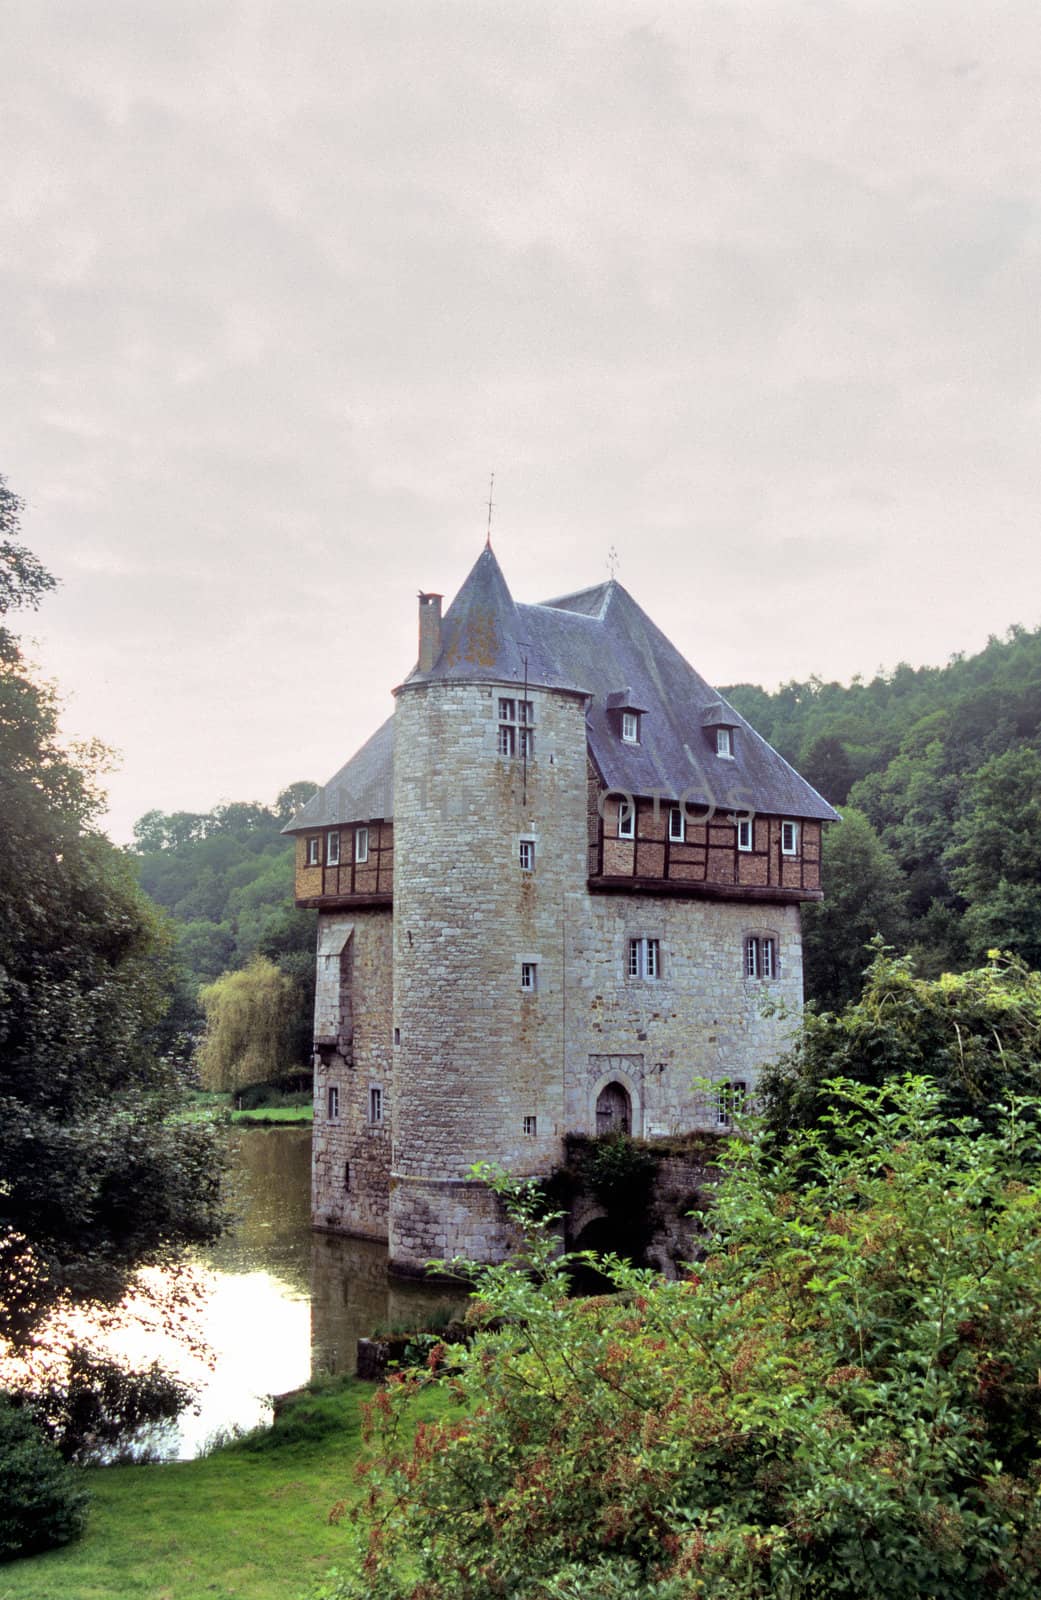 The sun sets on a castle surrounded by a moat in the Wallonian region of Belgium.